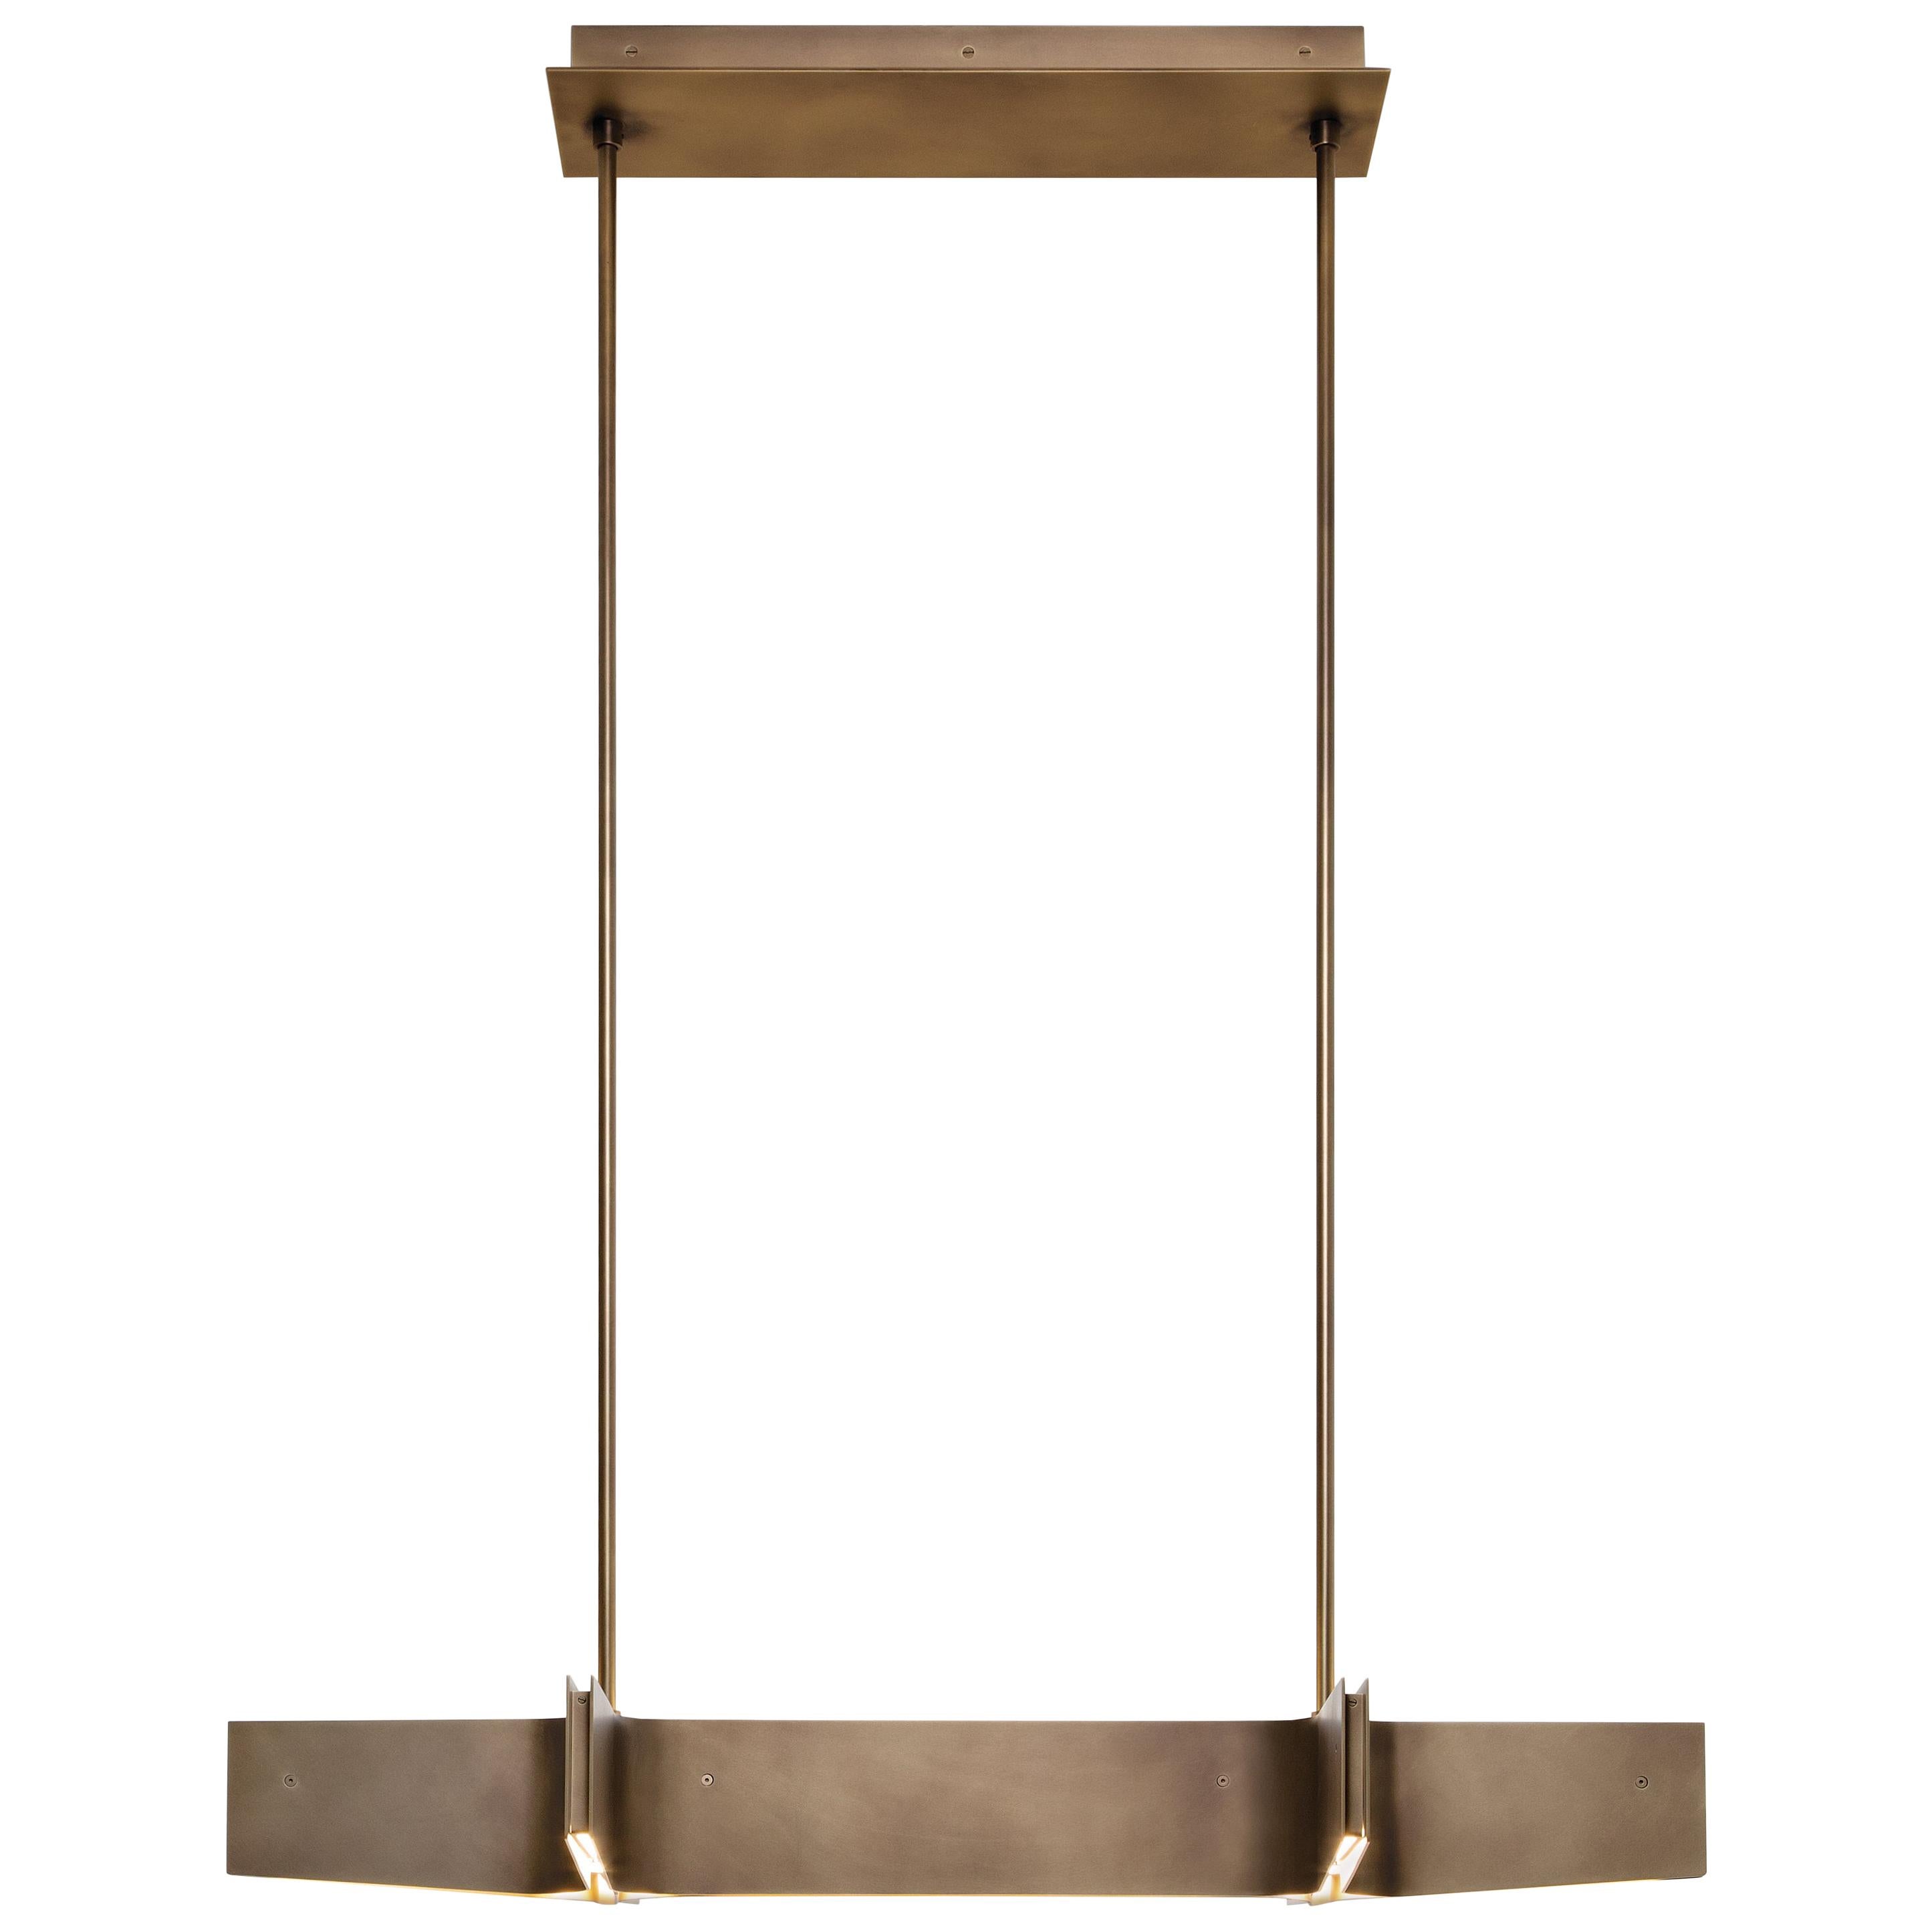 HOLLY HUNT Spanning Hanging Light with Light Bronze Patina Finish